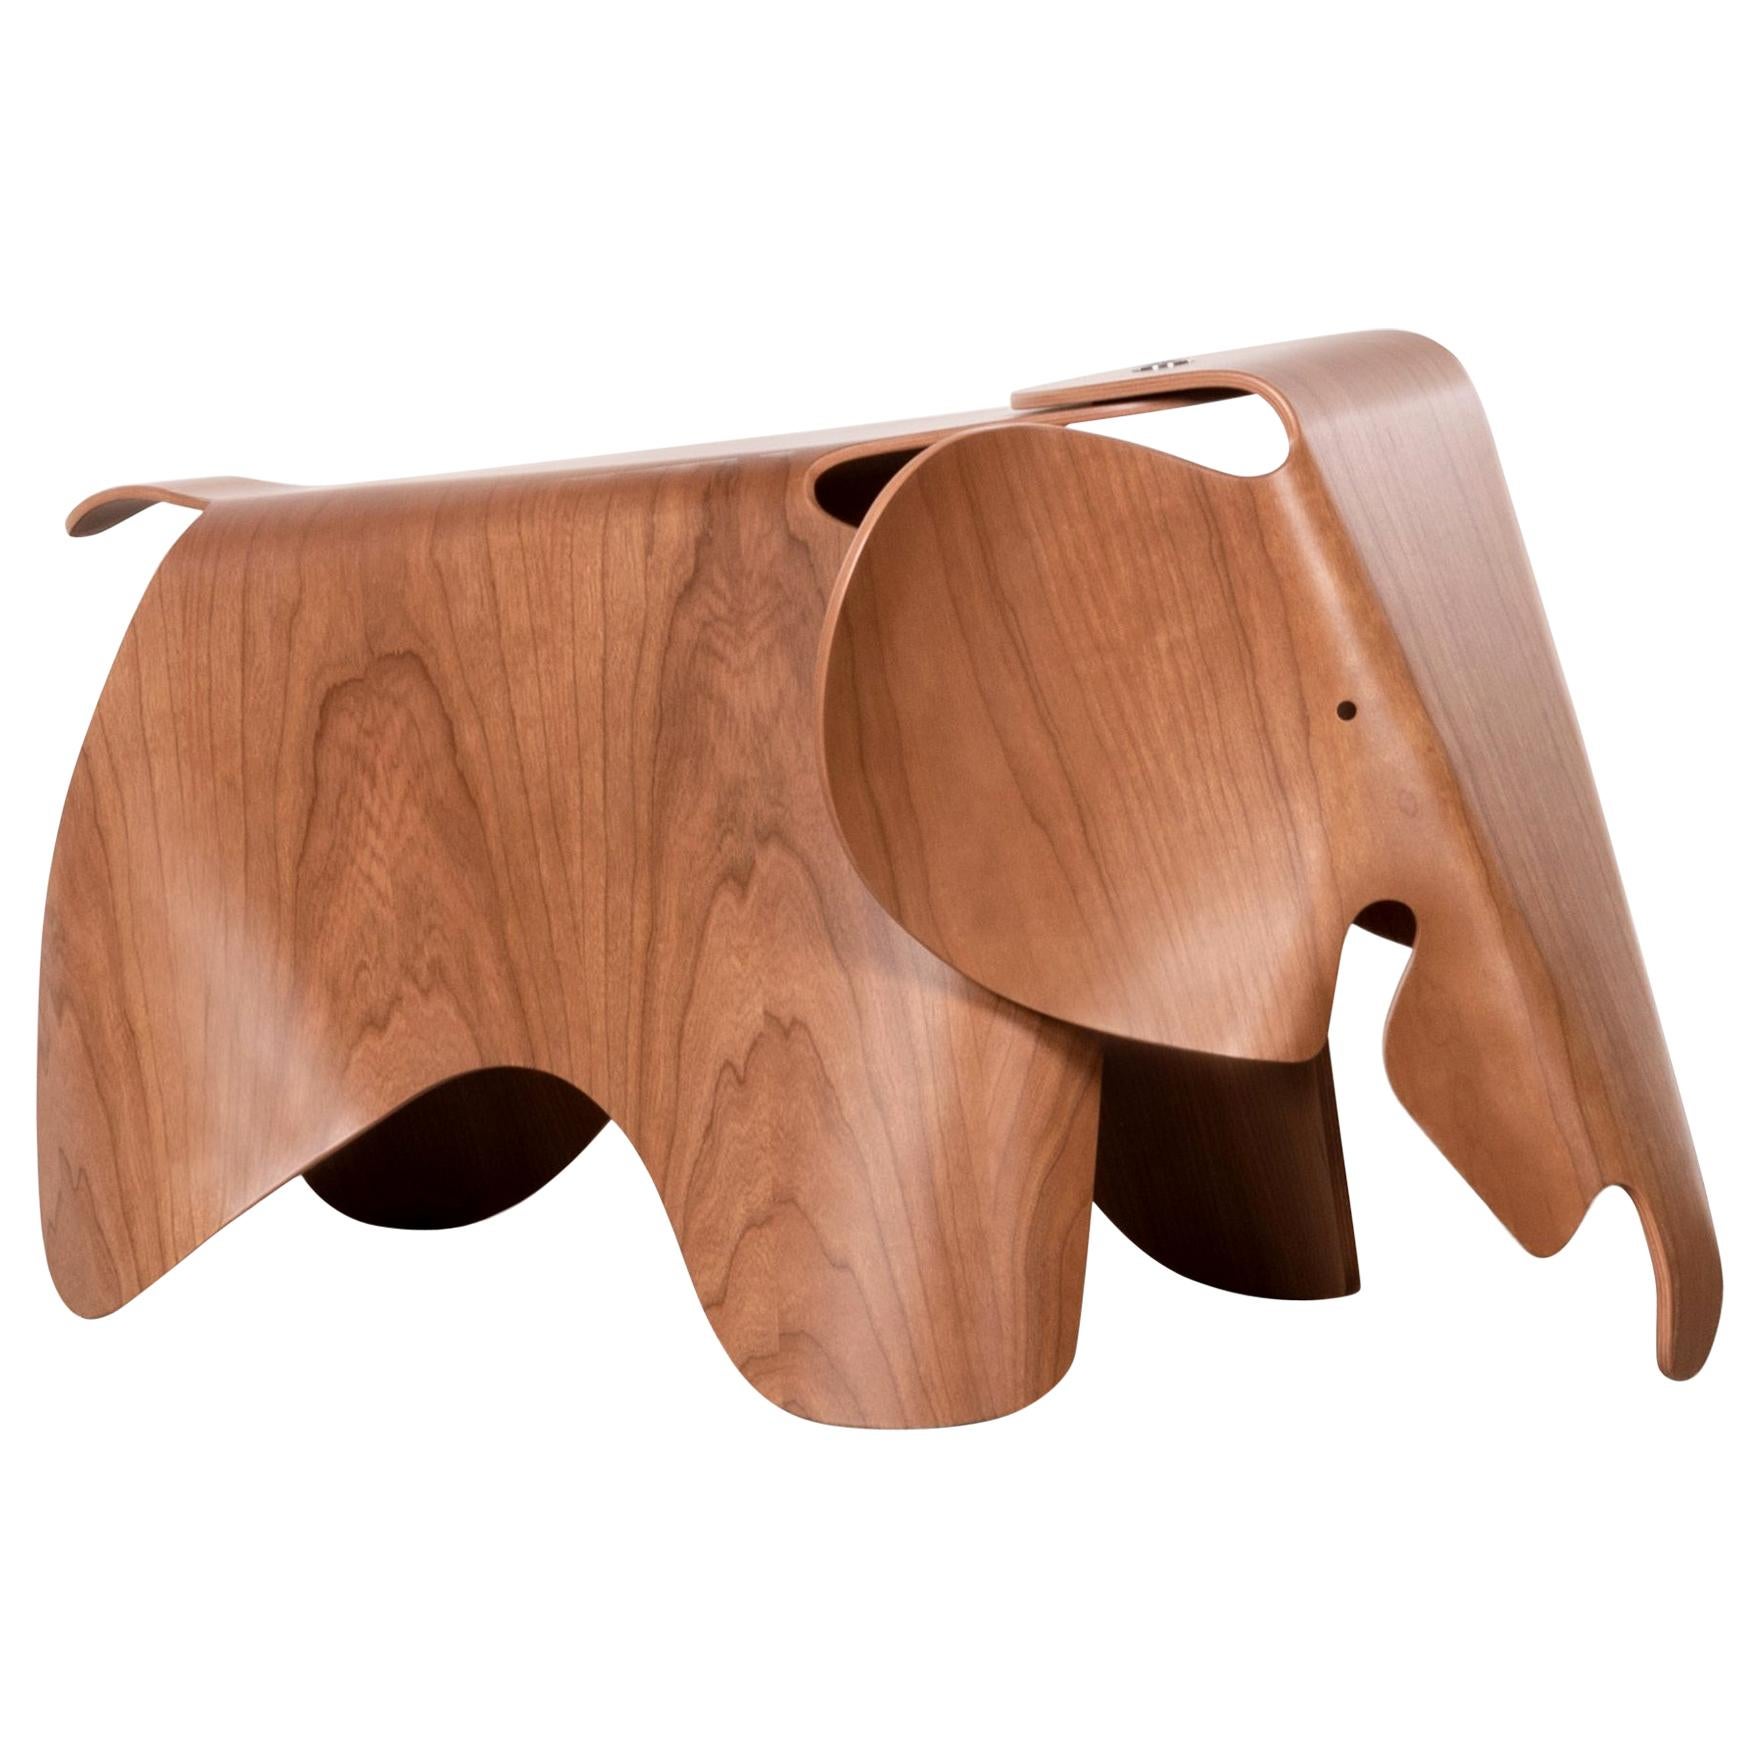 Charles and Ray Eames Plywood Elephant in Cherry wood by Vitra